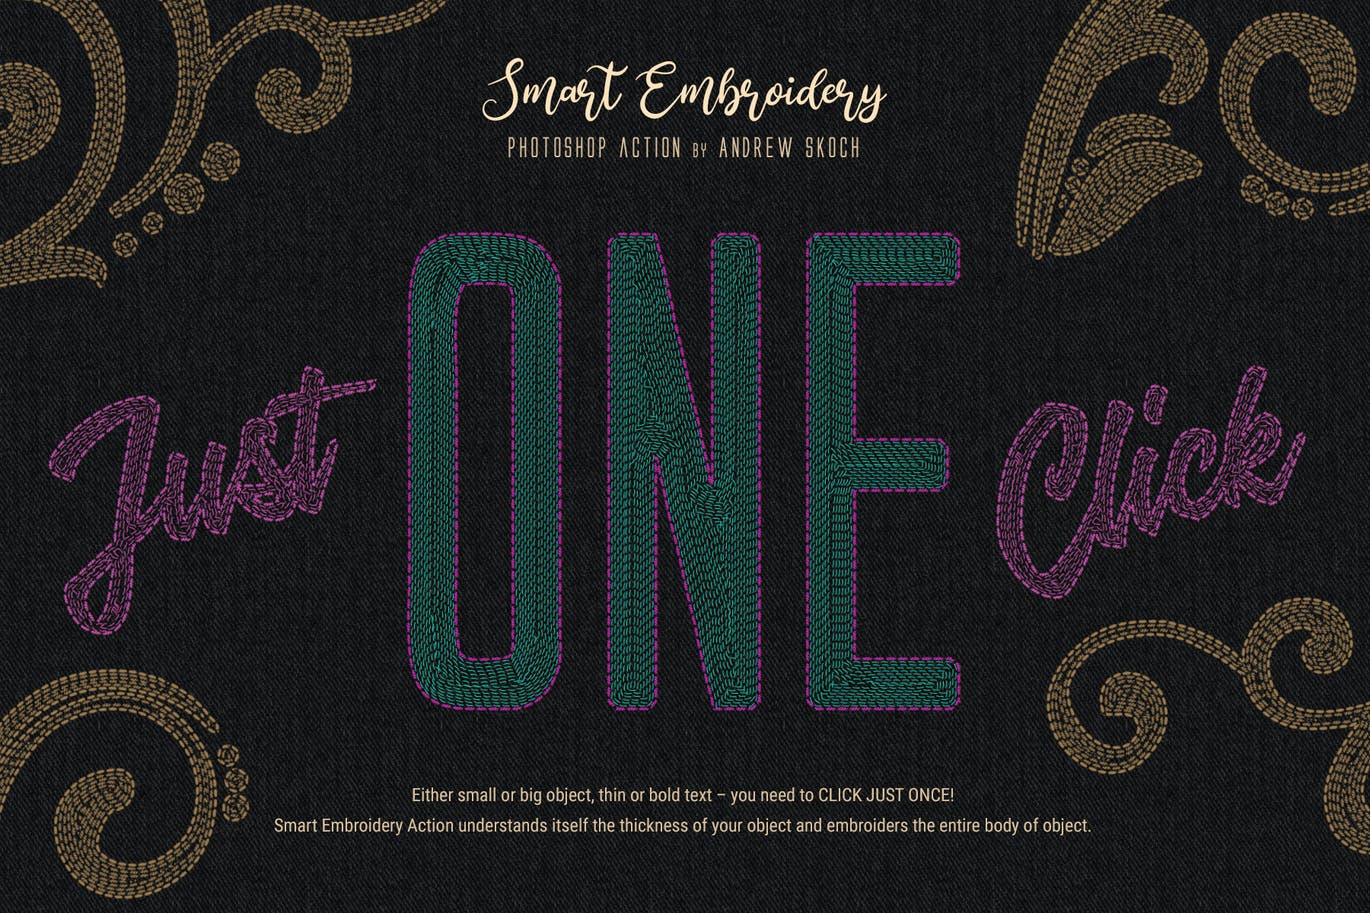 Smart Embroidery - Photoshop Action